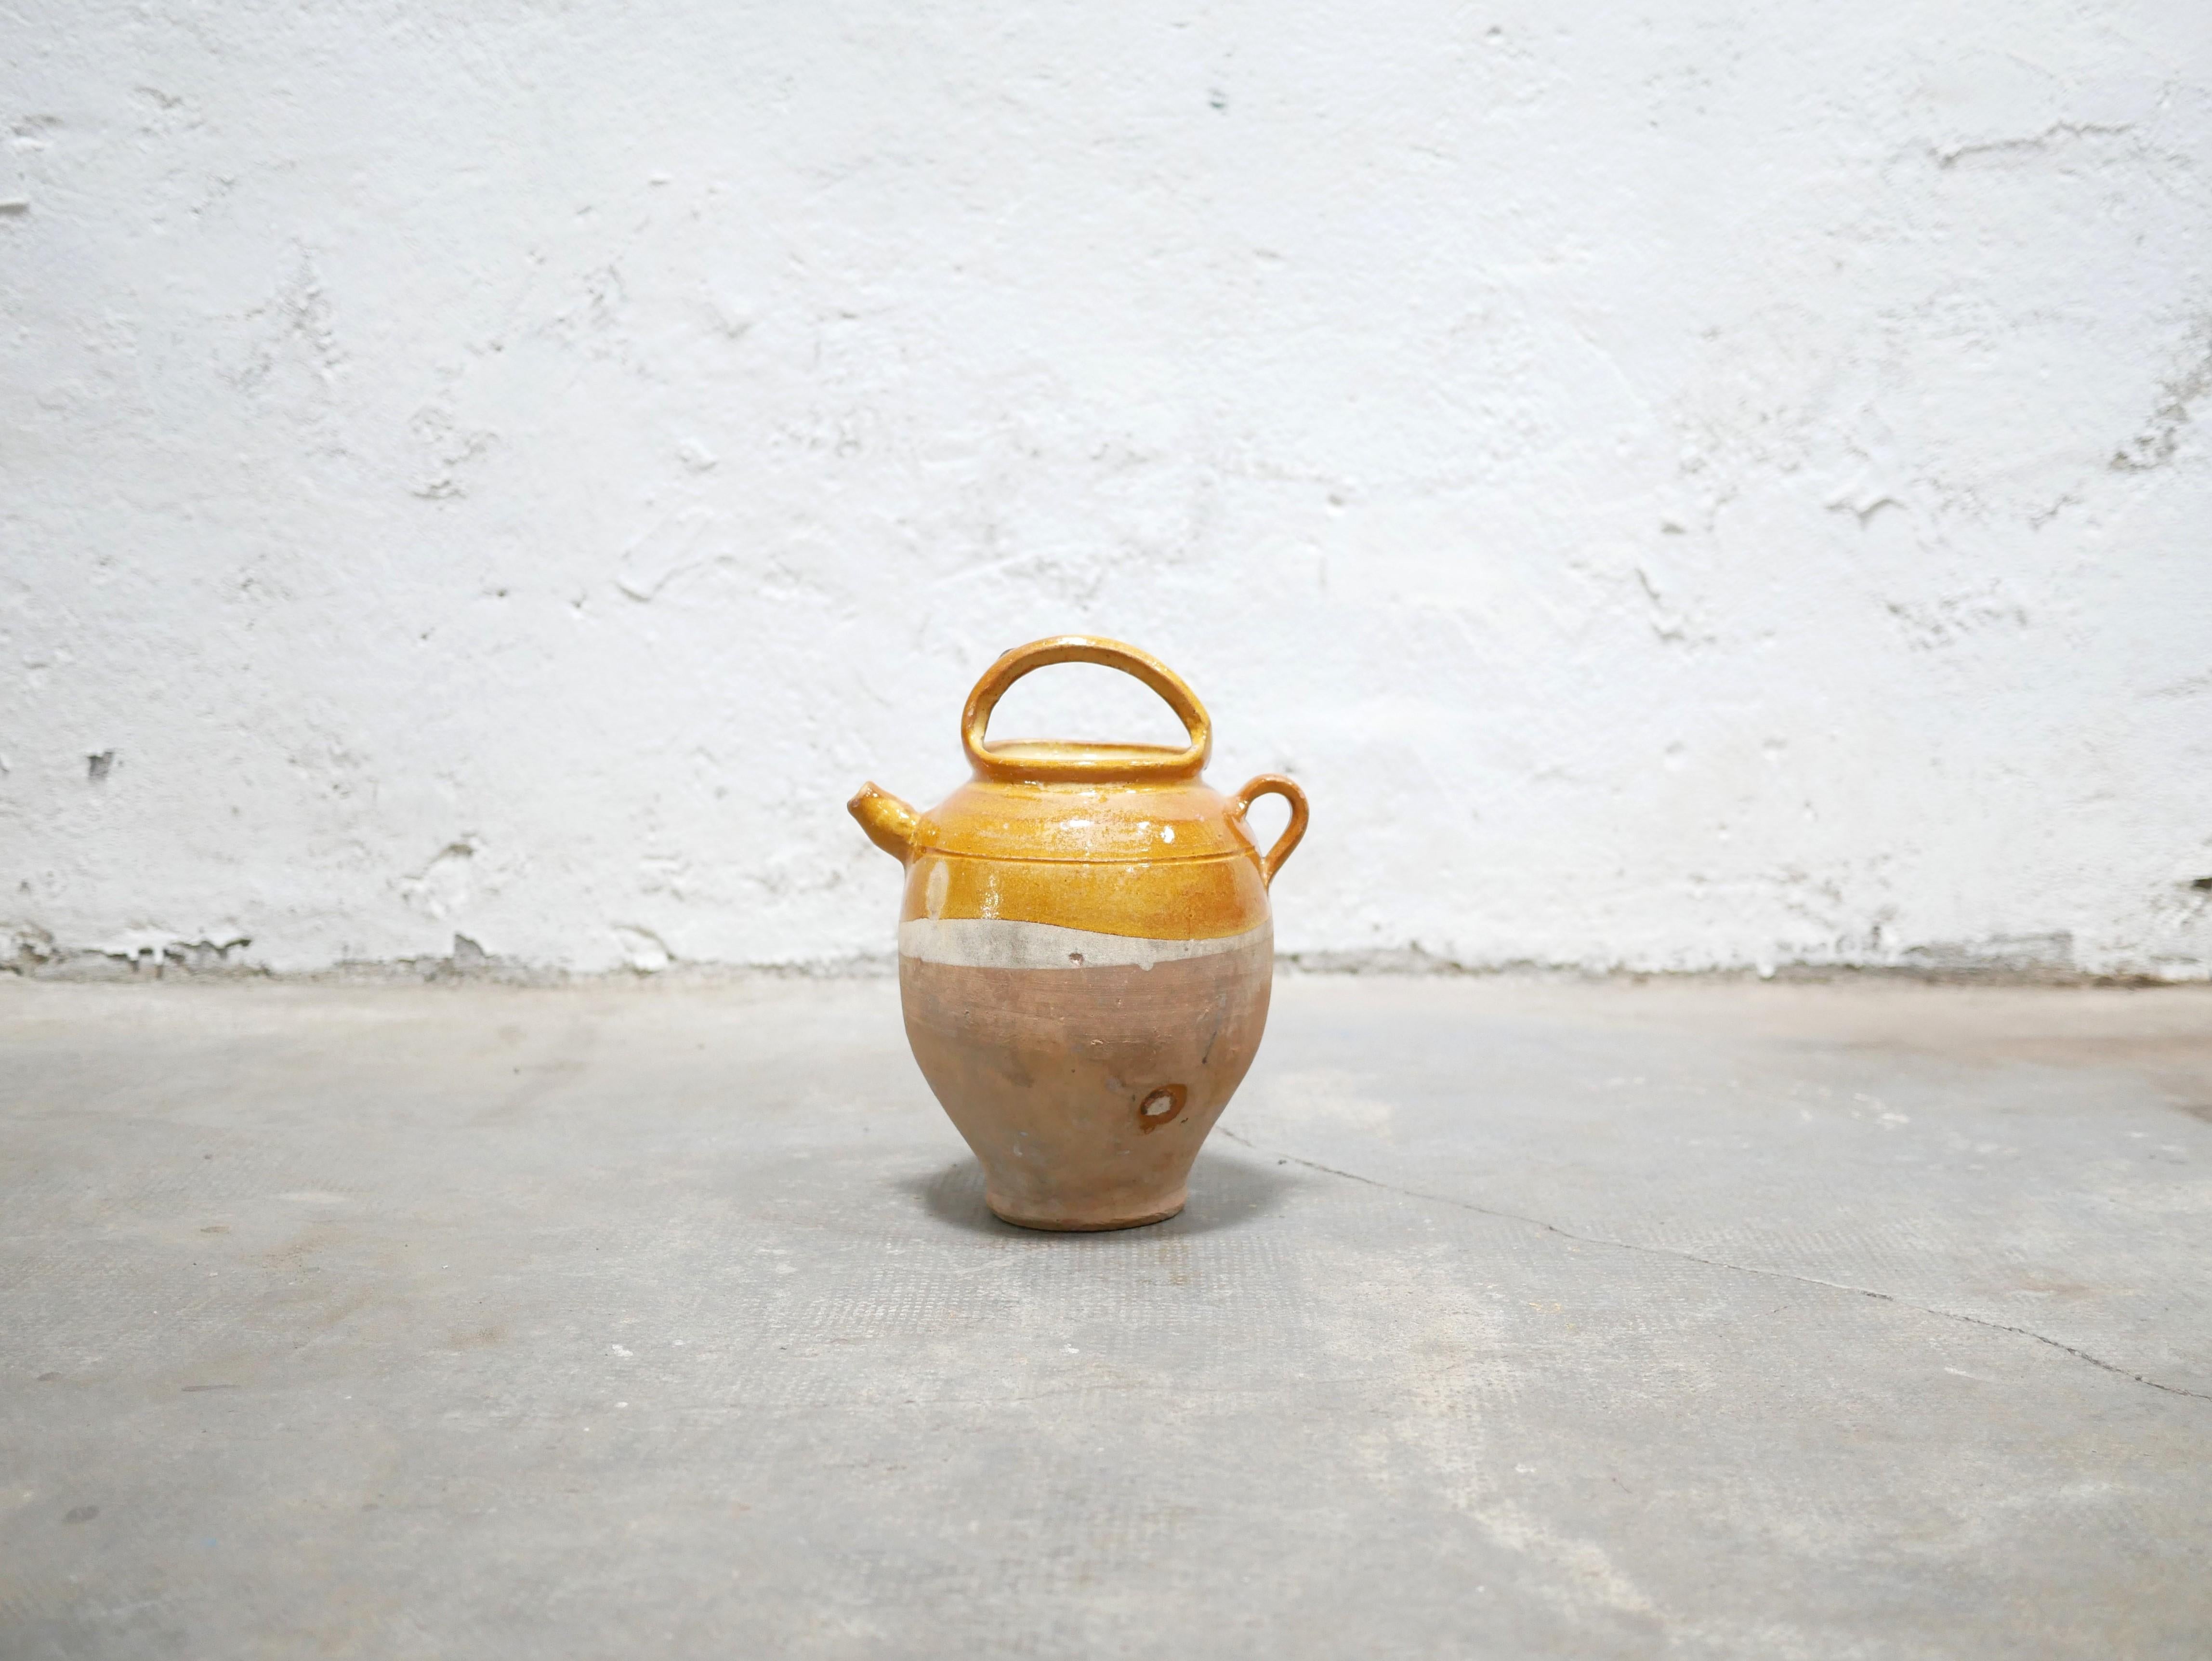 Glazed terracotta pot designed in France in the 1920s.

With its modern shape and its pretty bright and warm hue, this ceramic will be perfect in a natural, refined and delicate decoration.
We can simply imagine it placed on a shelf or piece of